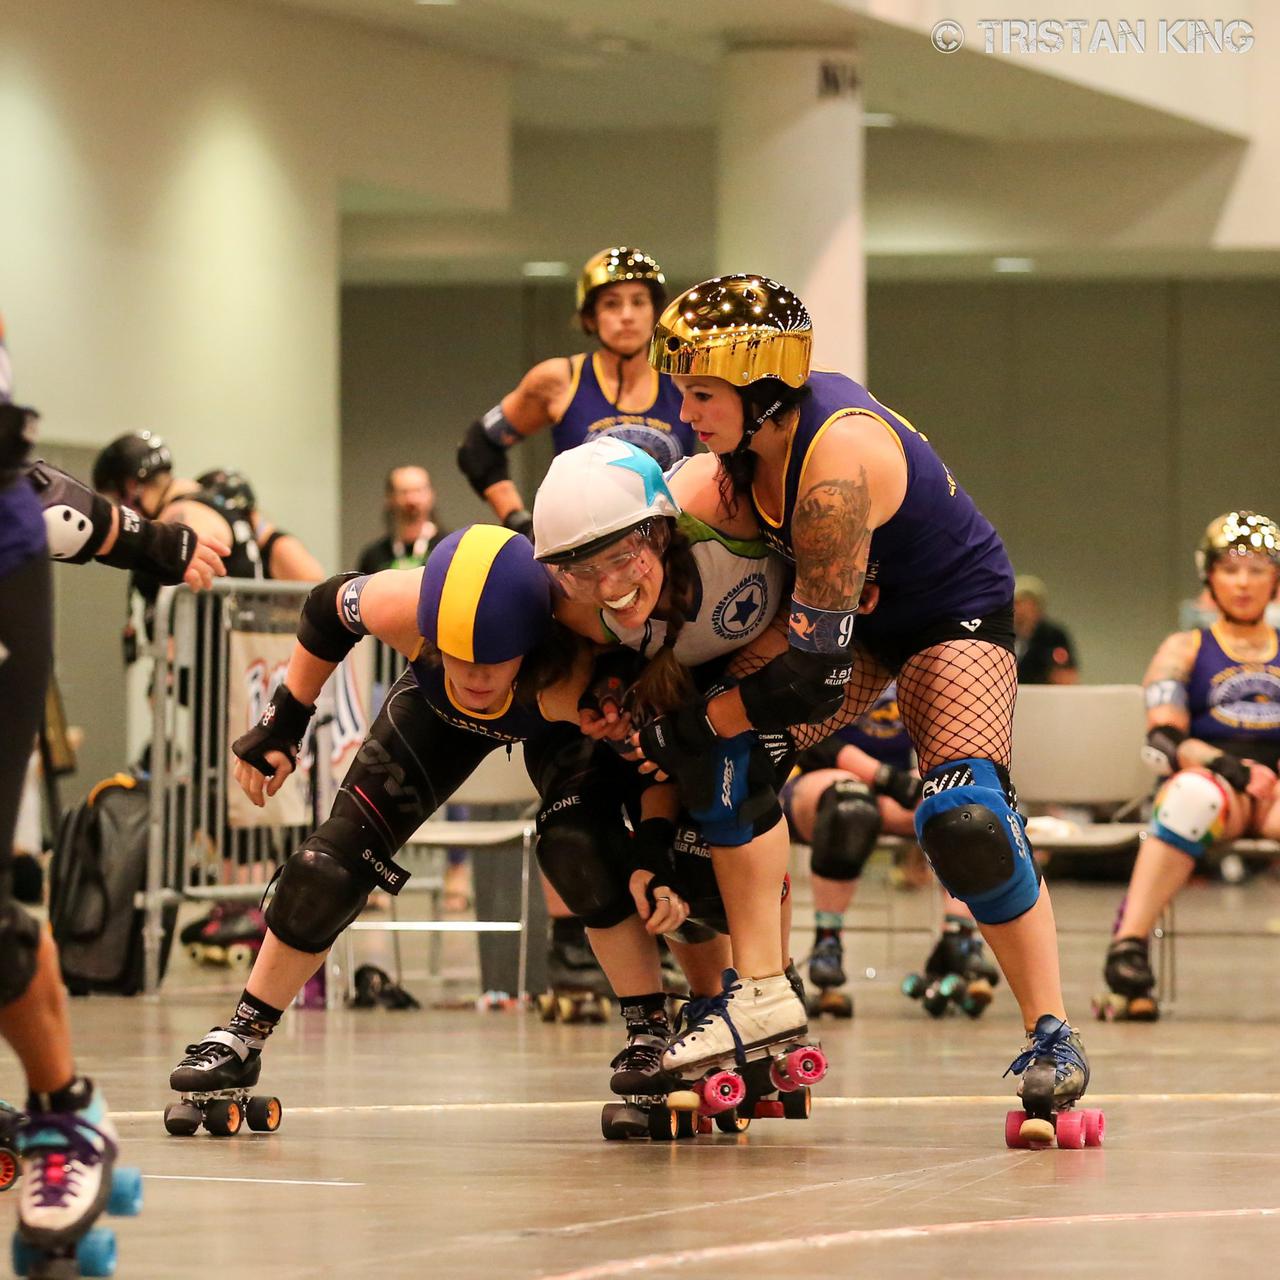 Team Indigenous and Jewish Roller Derby skaters in a complex blocking situation